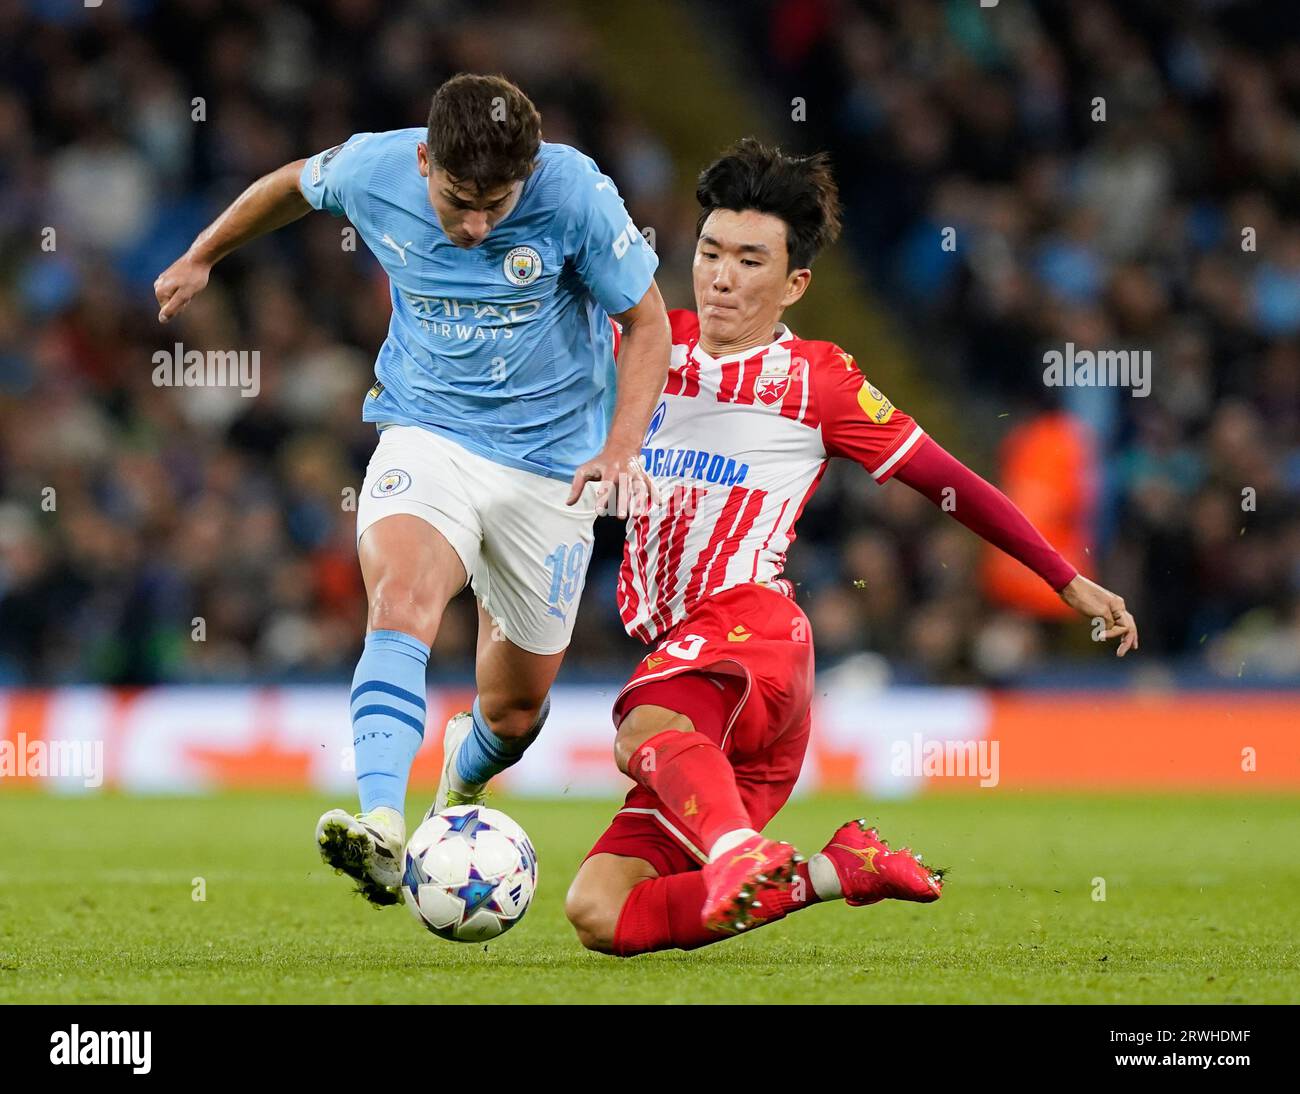 MANCHESTER, UK. 19th Sep, 2023. Julian Alvarez of Manchester City tackled by Inbeom Hwang of Red Star Belgrade during the UEFA Champions League match at the Etihad Stadium, Manchester. Picture credit should read: Andrew Yates/Sportimage Credit: Sportimage Ltd/Alamy Live News Stock Photo